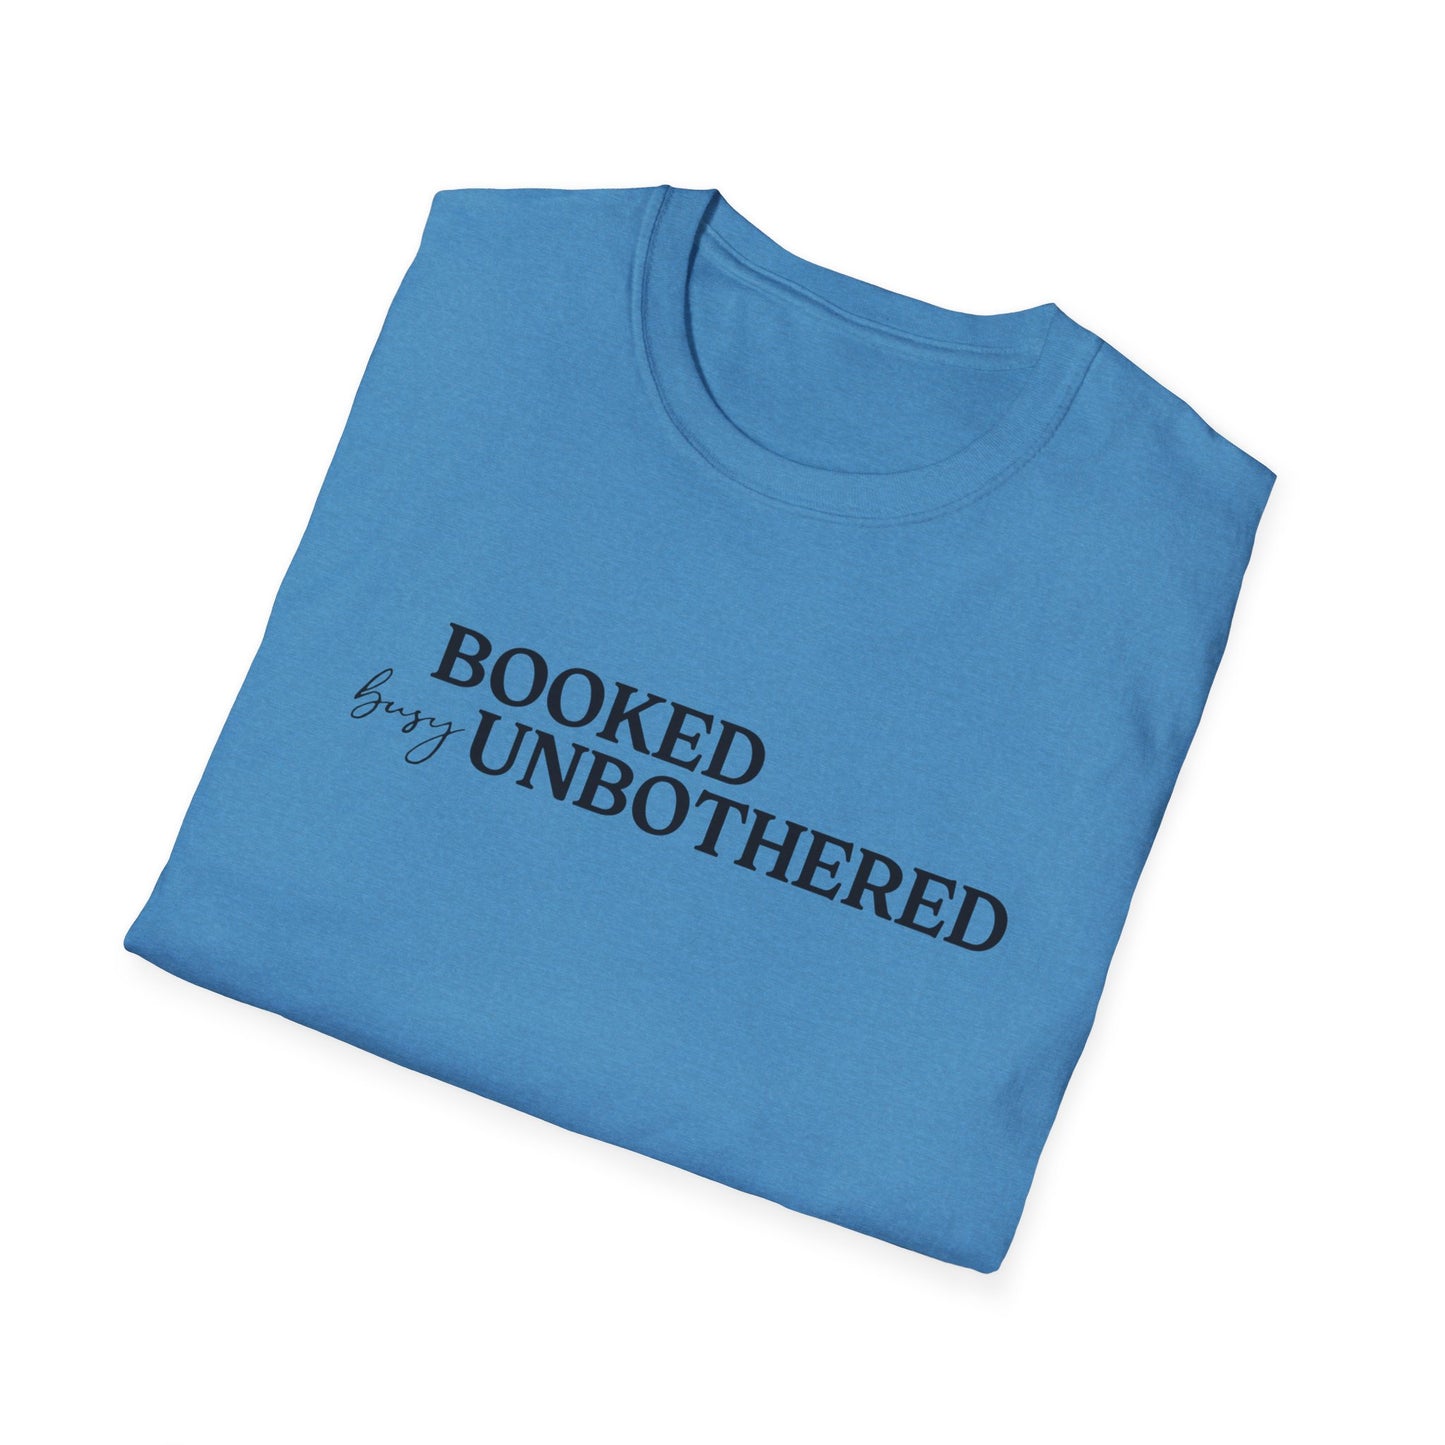 Inspirational (Booked Busy Unbothered/ Unisex Softstyle T-Shirt)